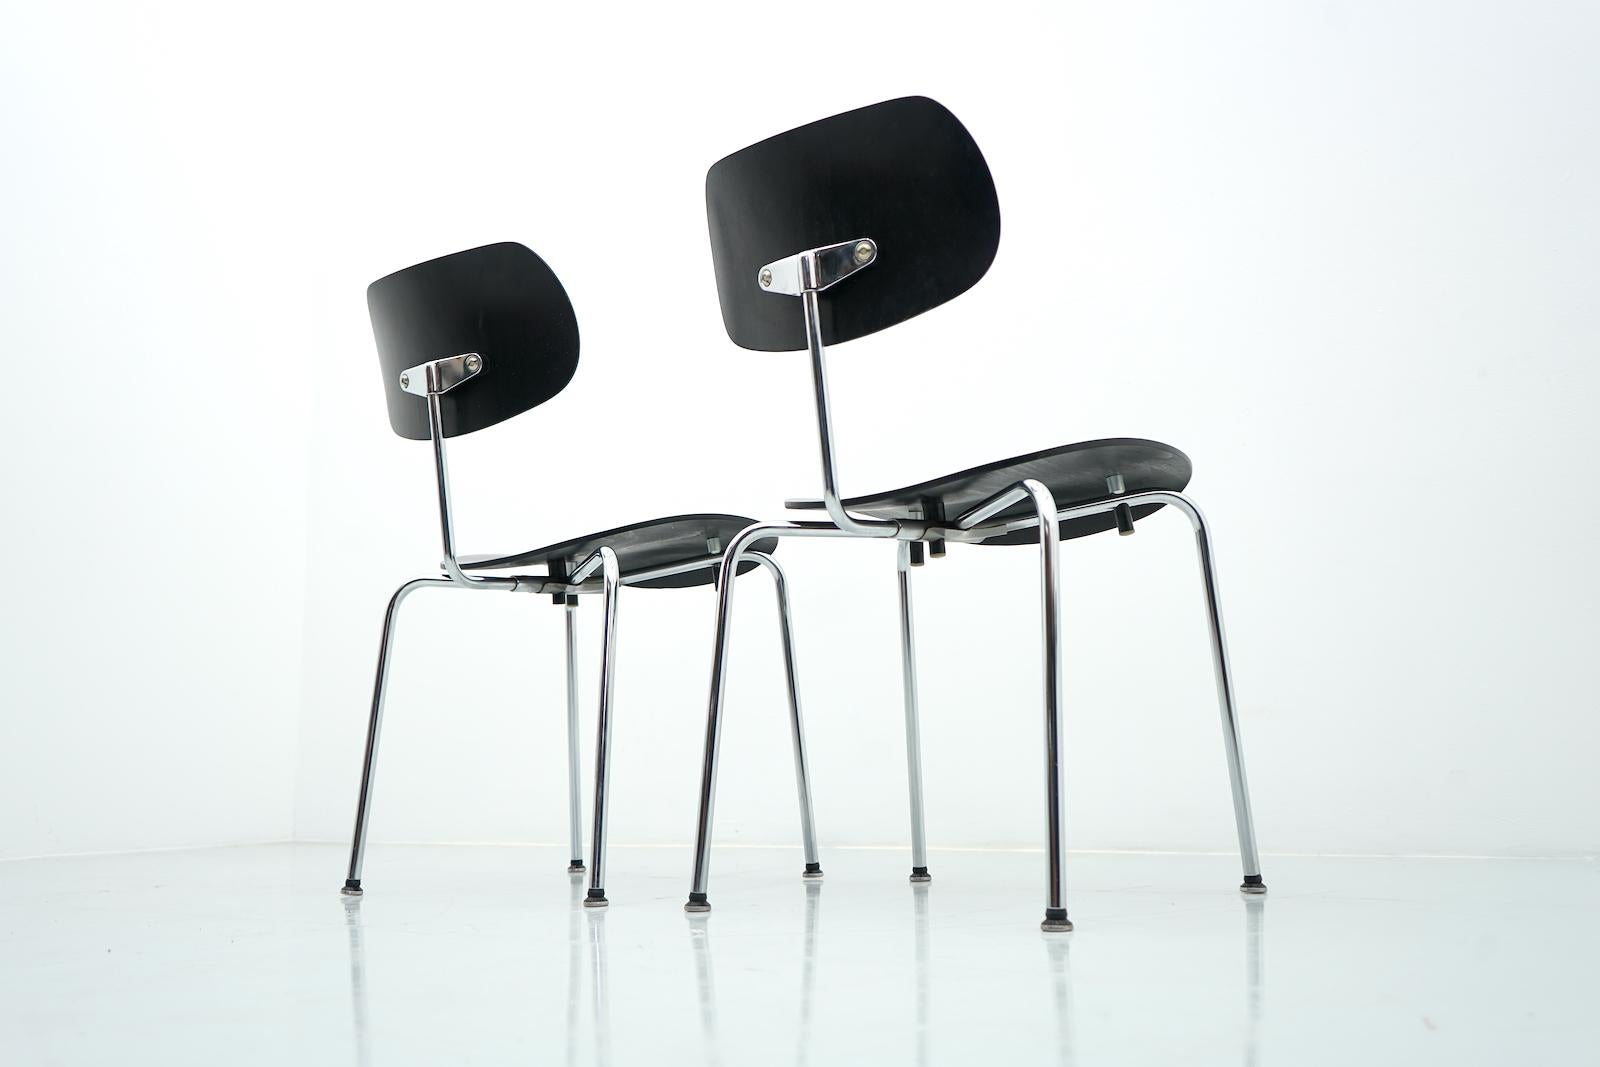 Egon Eiermann SE 68 side stacking chairs in black and chrome, Germany 1951, produced by Wilde & Spieth.
This set comes from the company BRAUN, Germany. 
9 chairs are available.